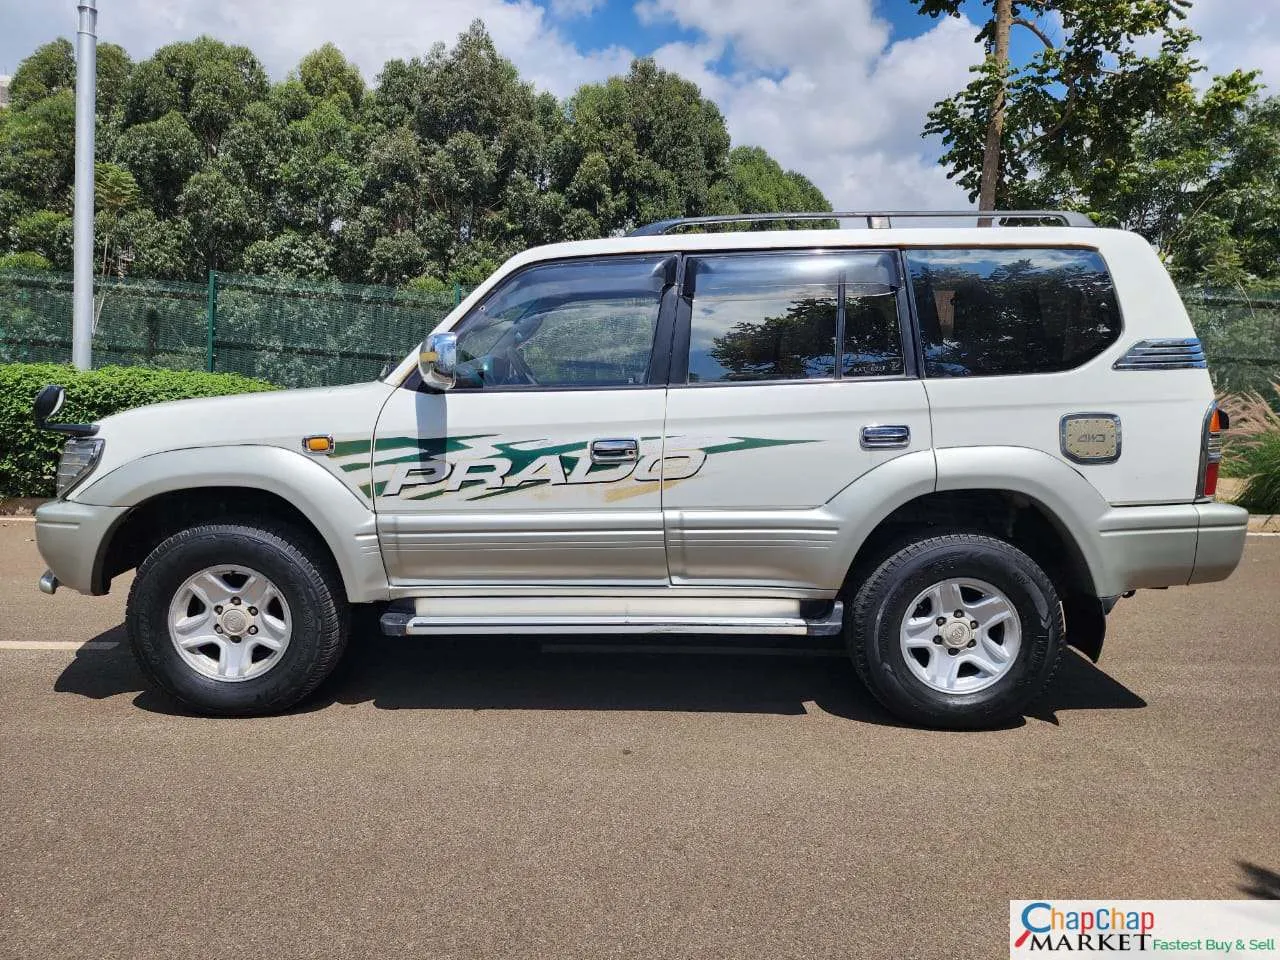 Cars Cars For Sale/Vehicles-Toyota Prado 95 for sale in Kenya QUICK SALE You Pay 30% Deposit Trade in OK EXCLUSIVE 9